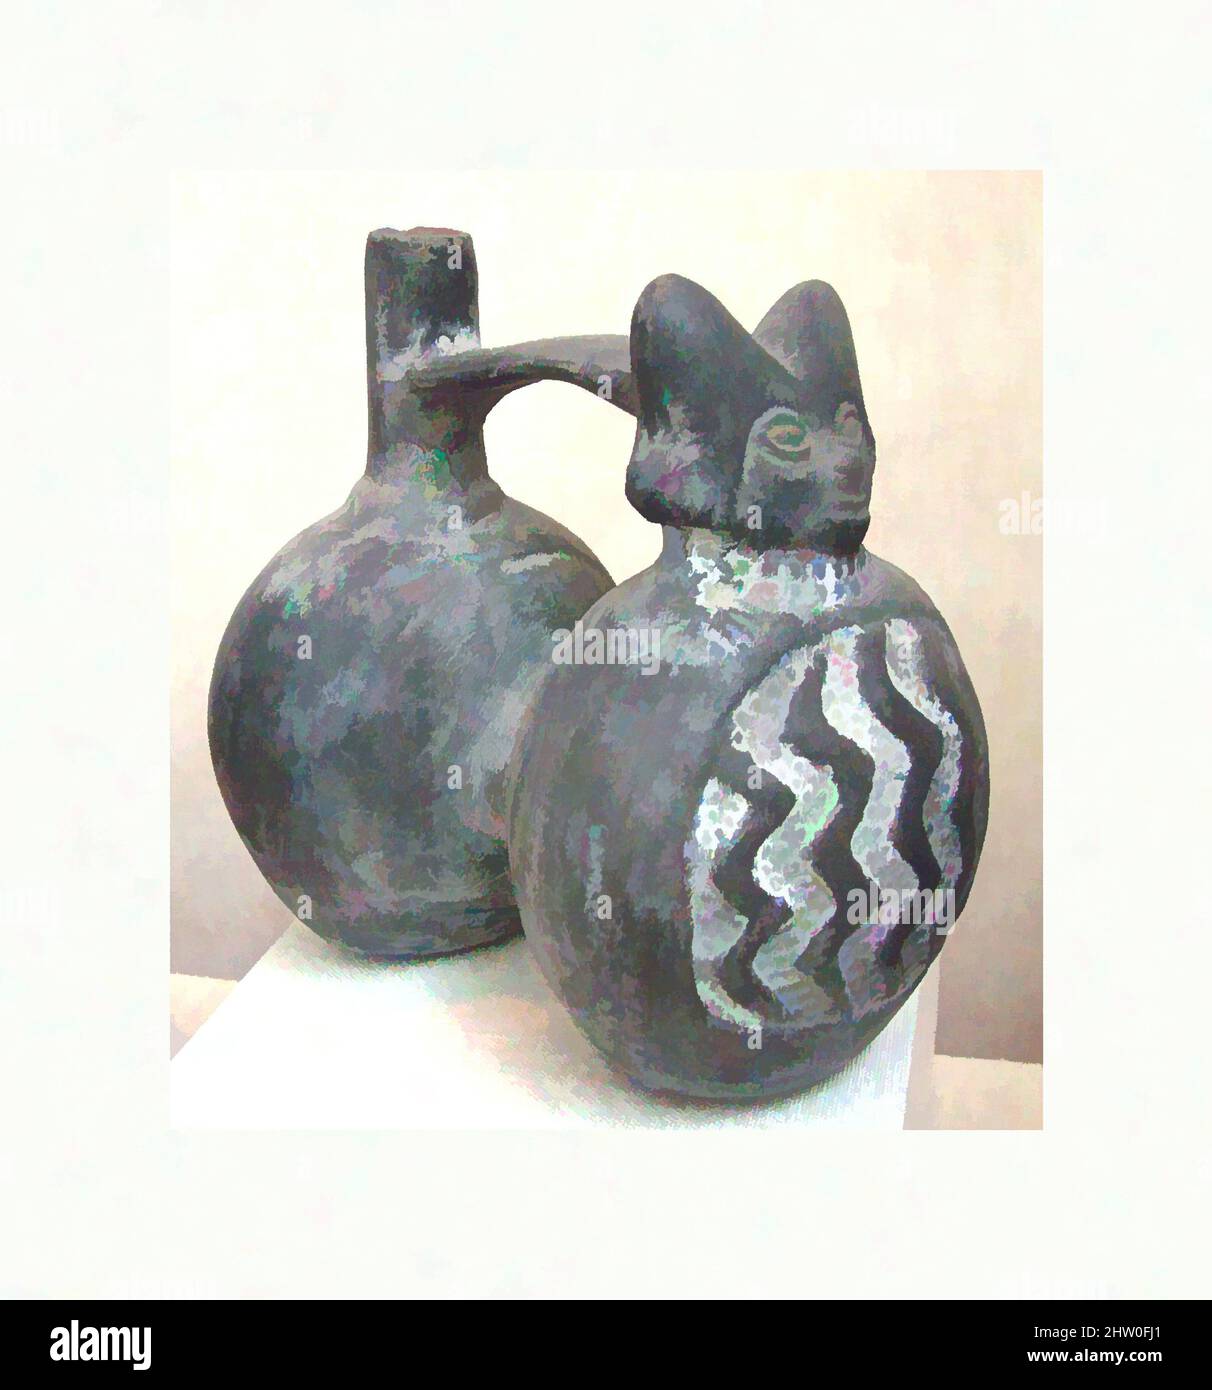 Art inspired by Whistling Jar, Pre-Columbian, ca. 1000–1476, Chepen or Lambayeque Valley, Peru, Peruvian, clay, L. 175 mm.; W. 106 mm.; H. 163 mm.;Wt. 563 g., Aerophone-Blow Hole-vessel flute, Whistling jar with head wearing a headdress. Although numerous pottery instruments survive, Classic works modernized by Artotop with a splash of modernity. Shapes, color and value, eye-catching visual impact on art. Emotions through freedom of artworks in a contemporary way. A timeless message pursuing a wildly creative new direction. Artists turning to the digital medium and creating the Artotop NFT Stock Photo